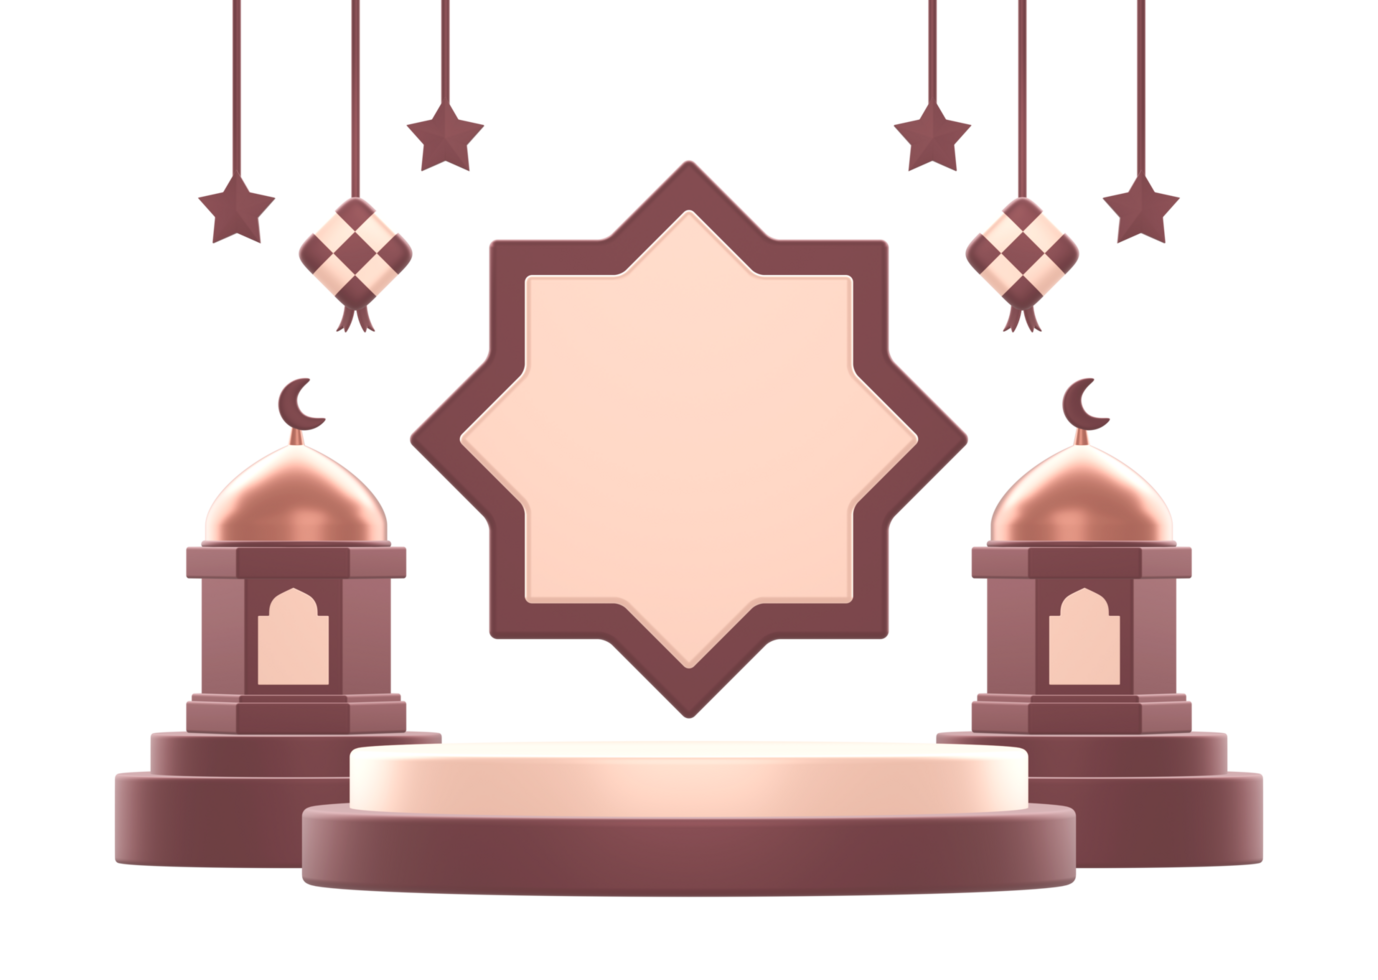 3d rendering of islamic celebration festival or holiday podium display background with arabic lantern decoration and stars png